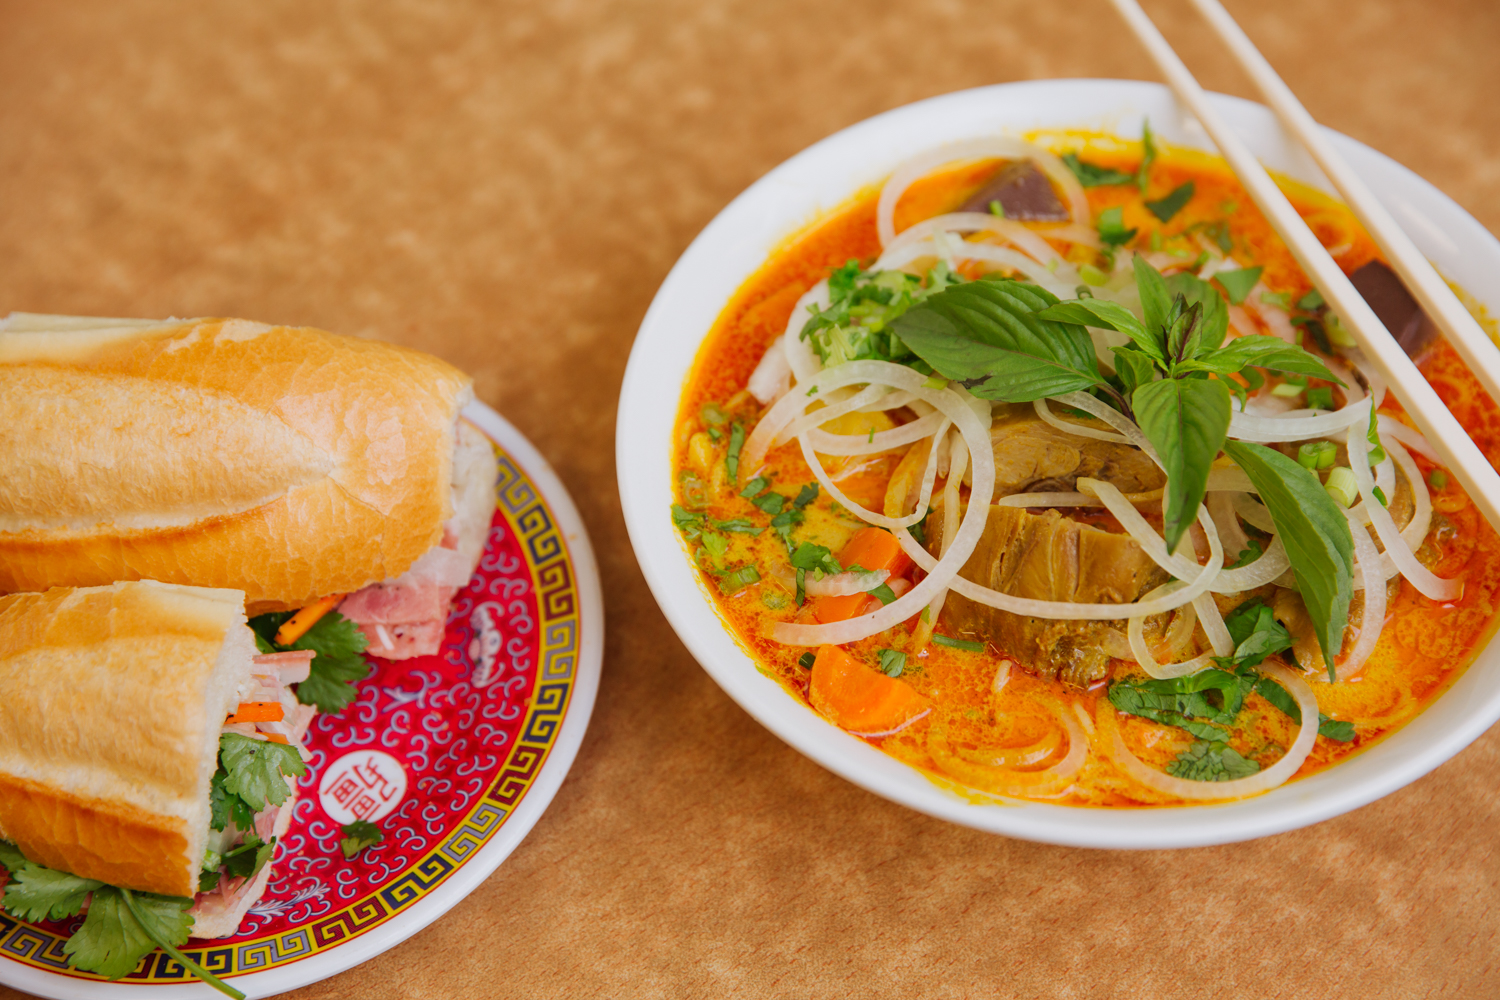  Banh mi and curry chicken pho 